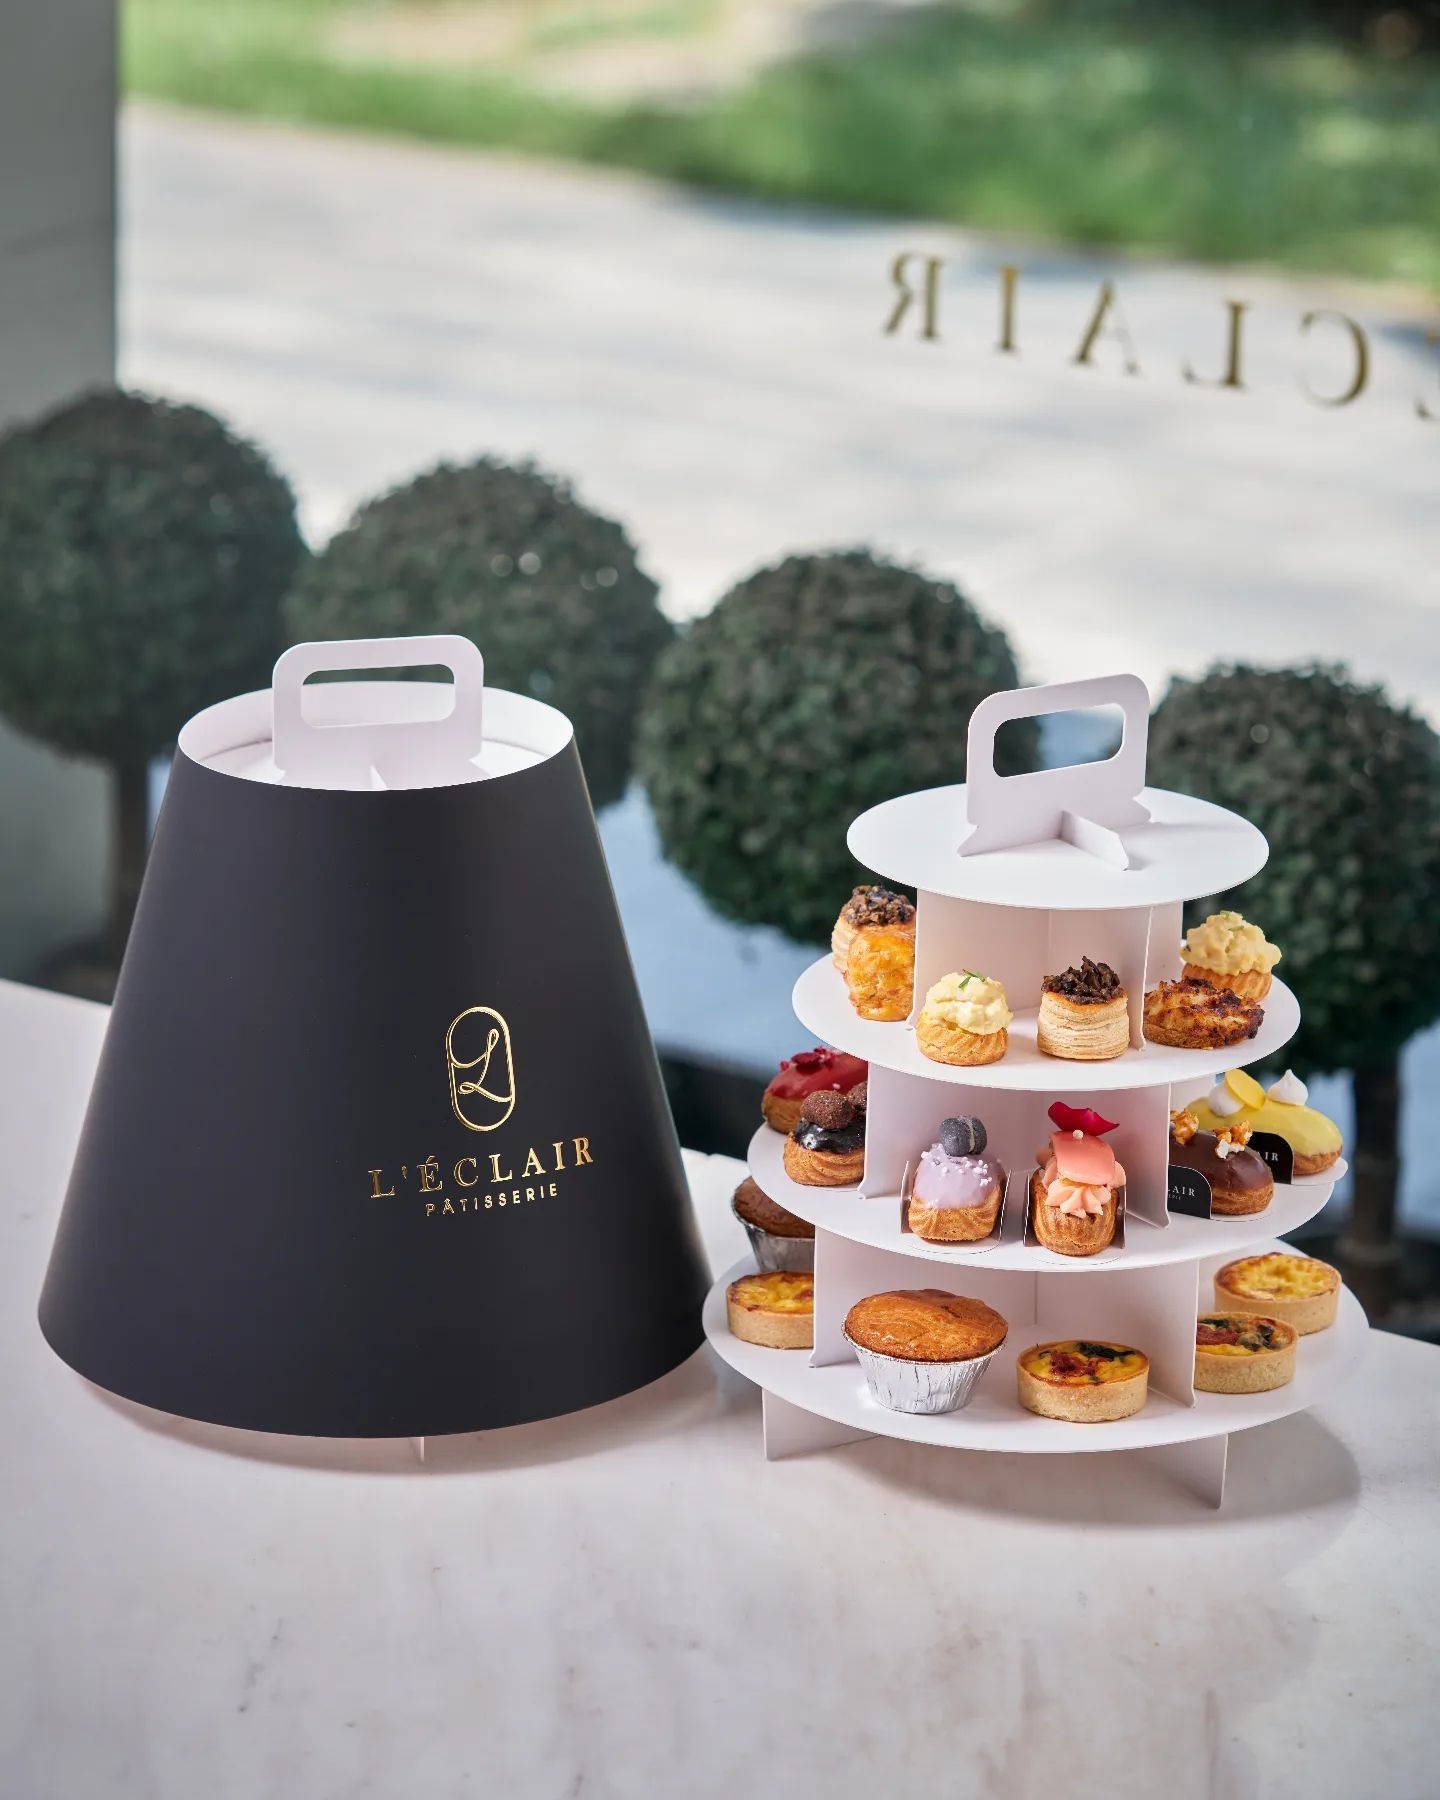 Indulge in our take-home High Tea set for a delightful afternoon break or send it as a gift to your loved ones!

Available for self collection or delivery via www.leclair.com.sg/shop.